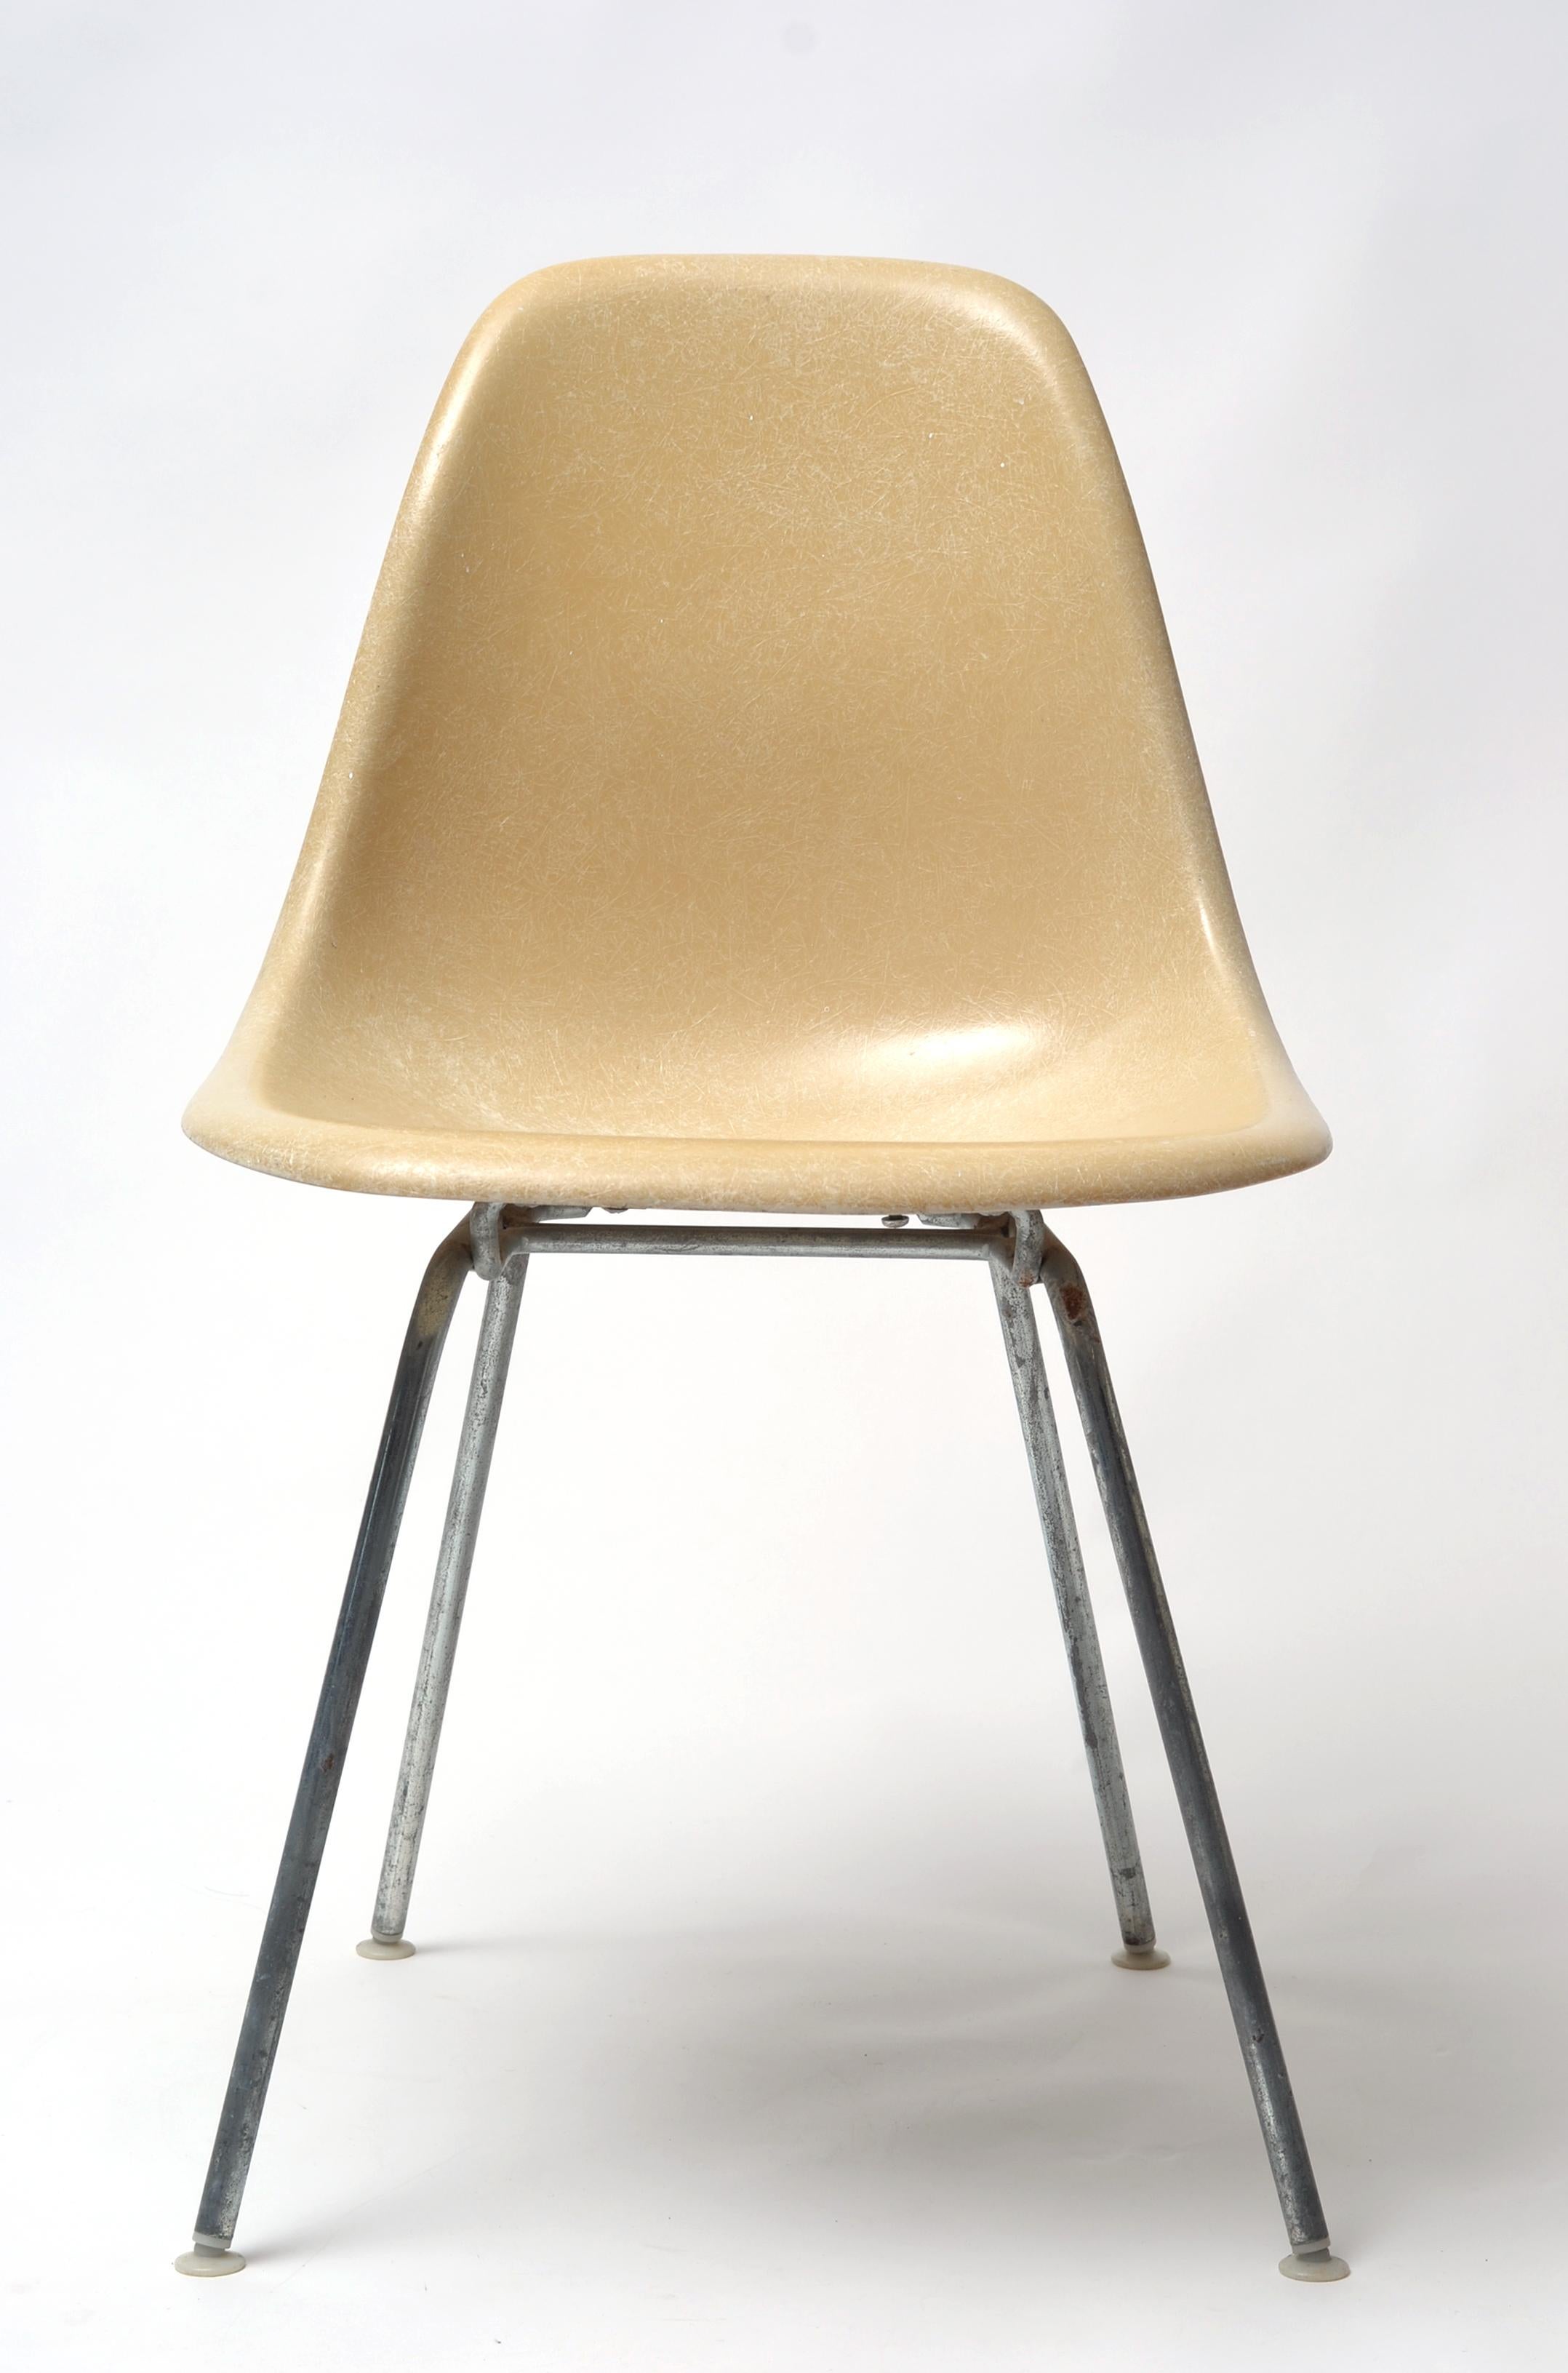 Classic, vintage Eames fiberglass shell chair in Parchment on 